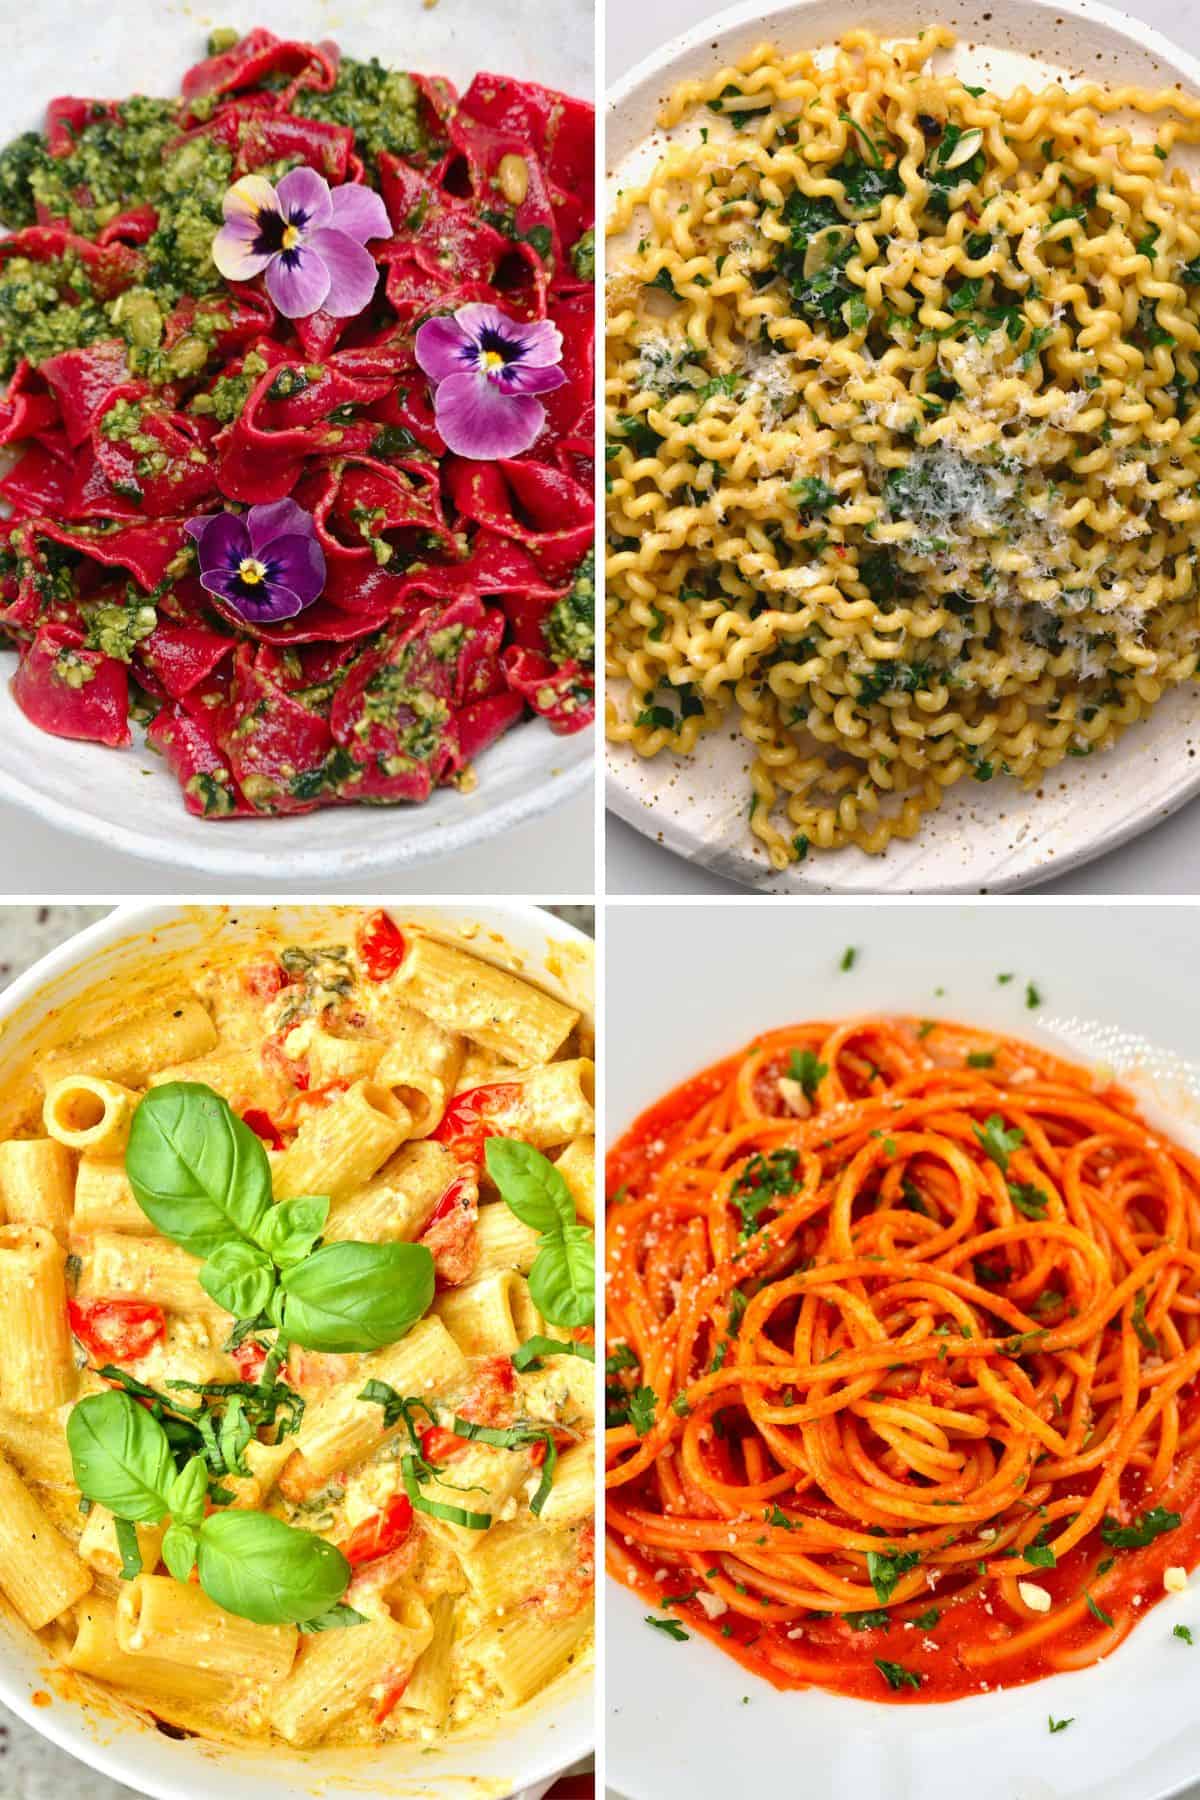 Pasta dishes as hot lunch ideas